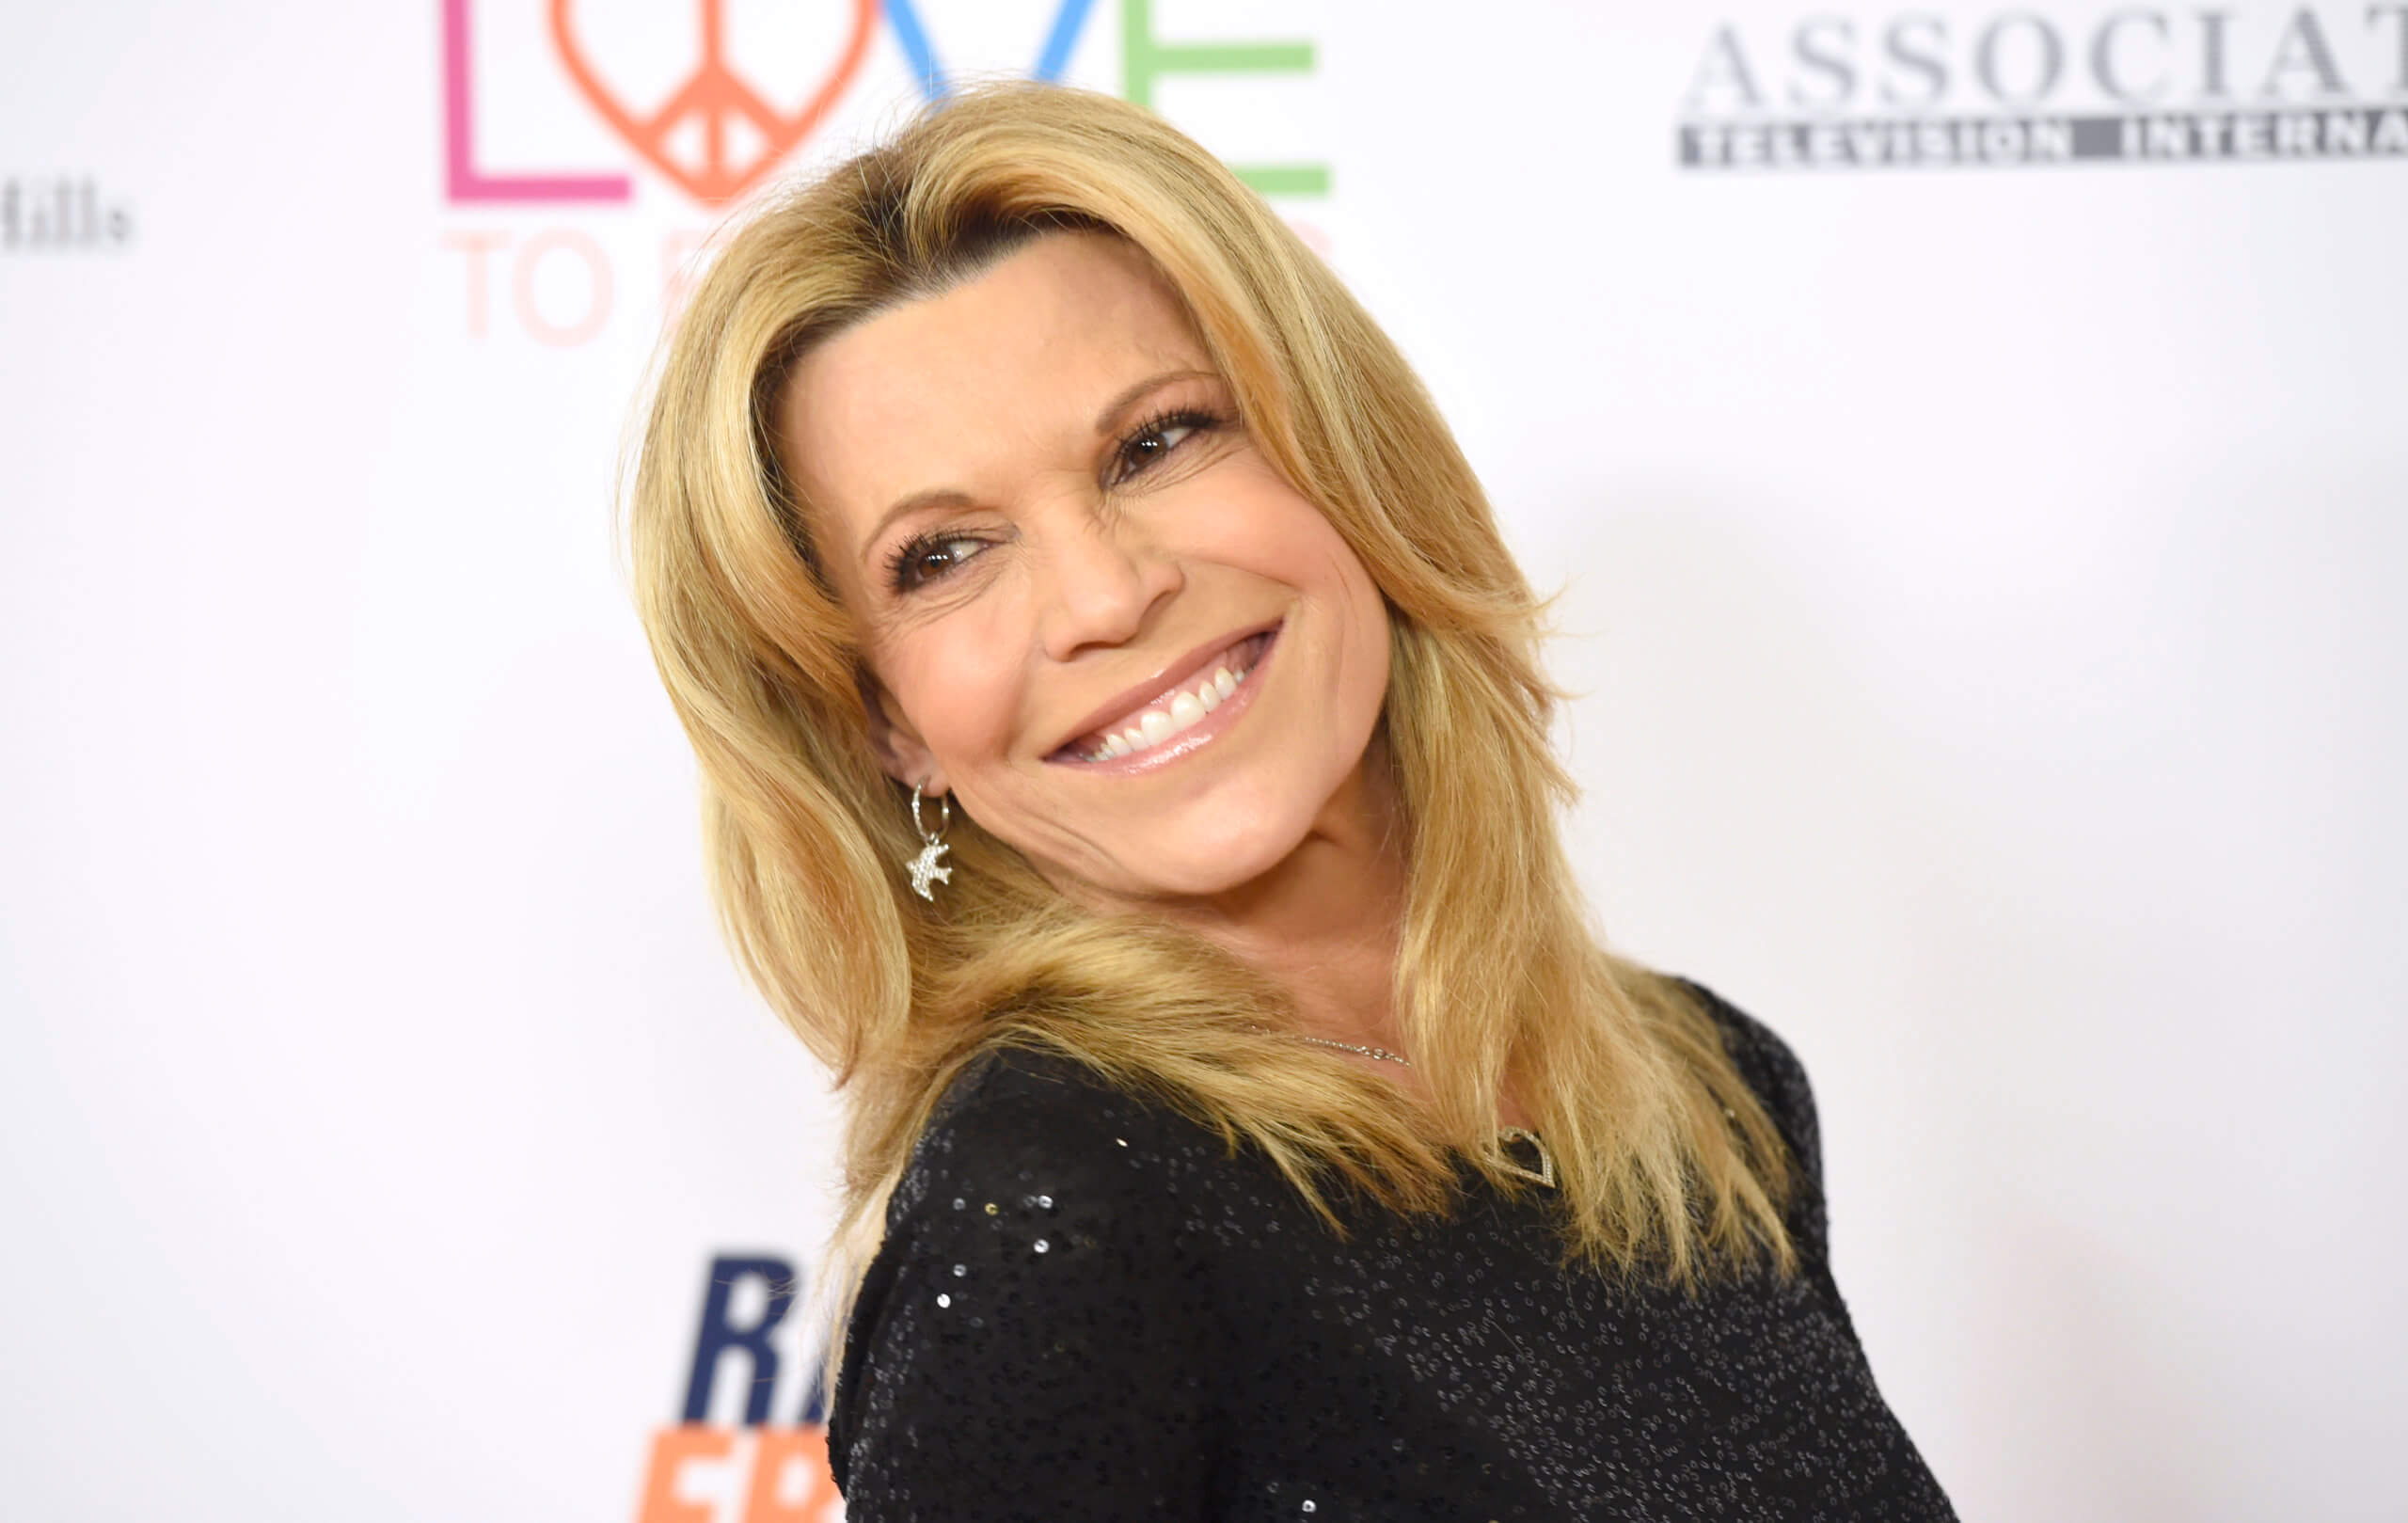 Vanna White arrives at the 25th annual Race to Erase MS Gala at The Beverly Hilton hotel on Friday, April 20, 2018, in Beverly Hills, Calif. (Photo by Chris Pizzello/Invision/AP)